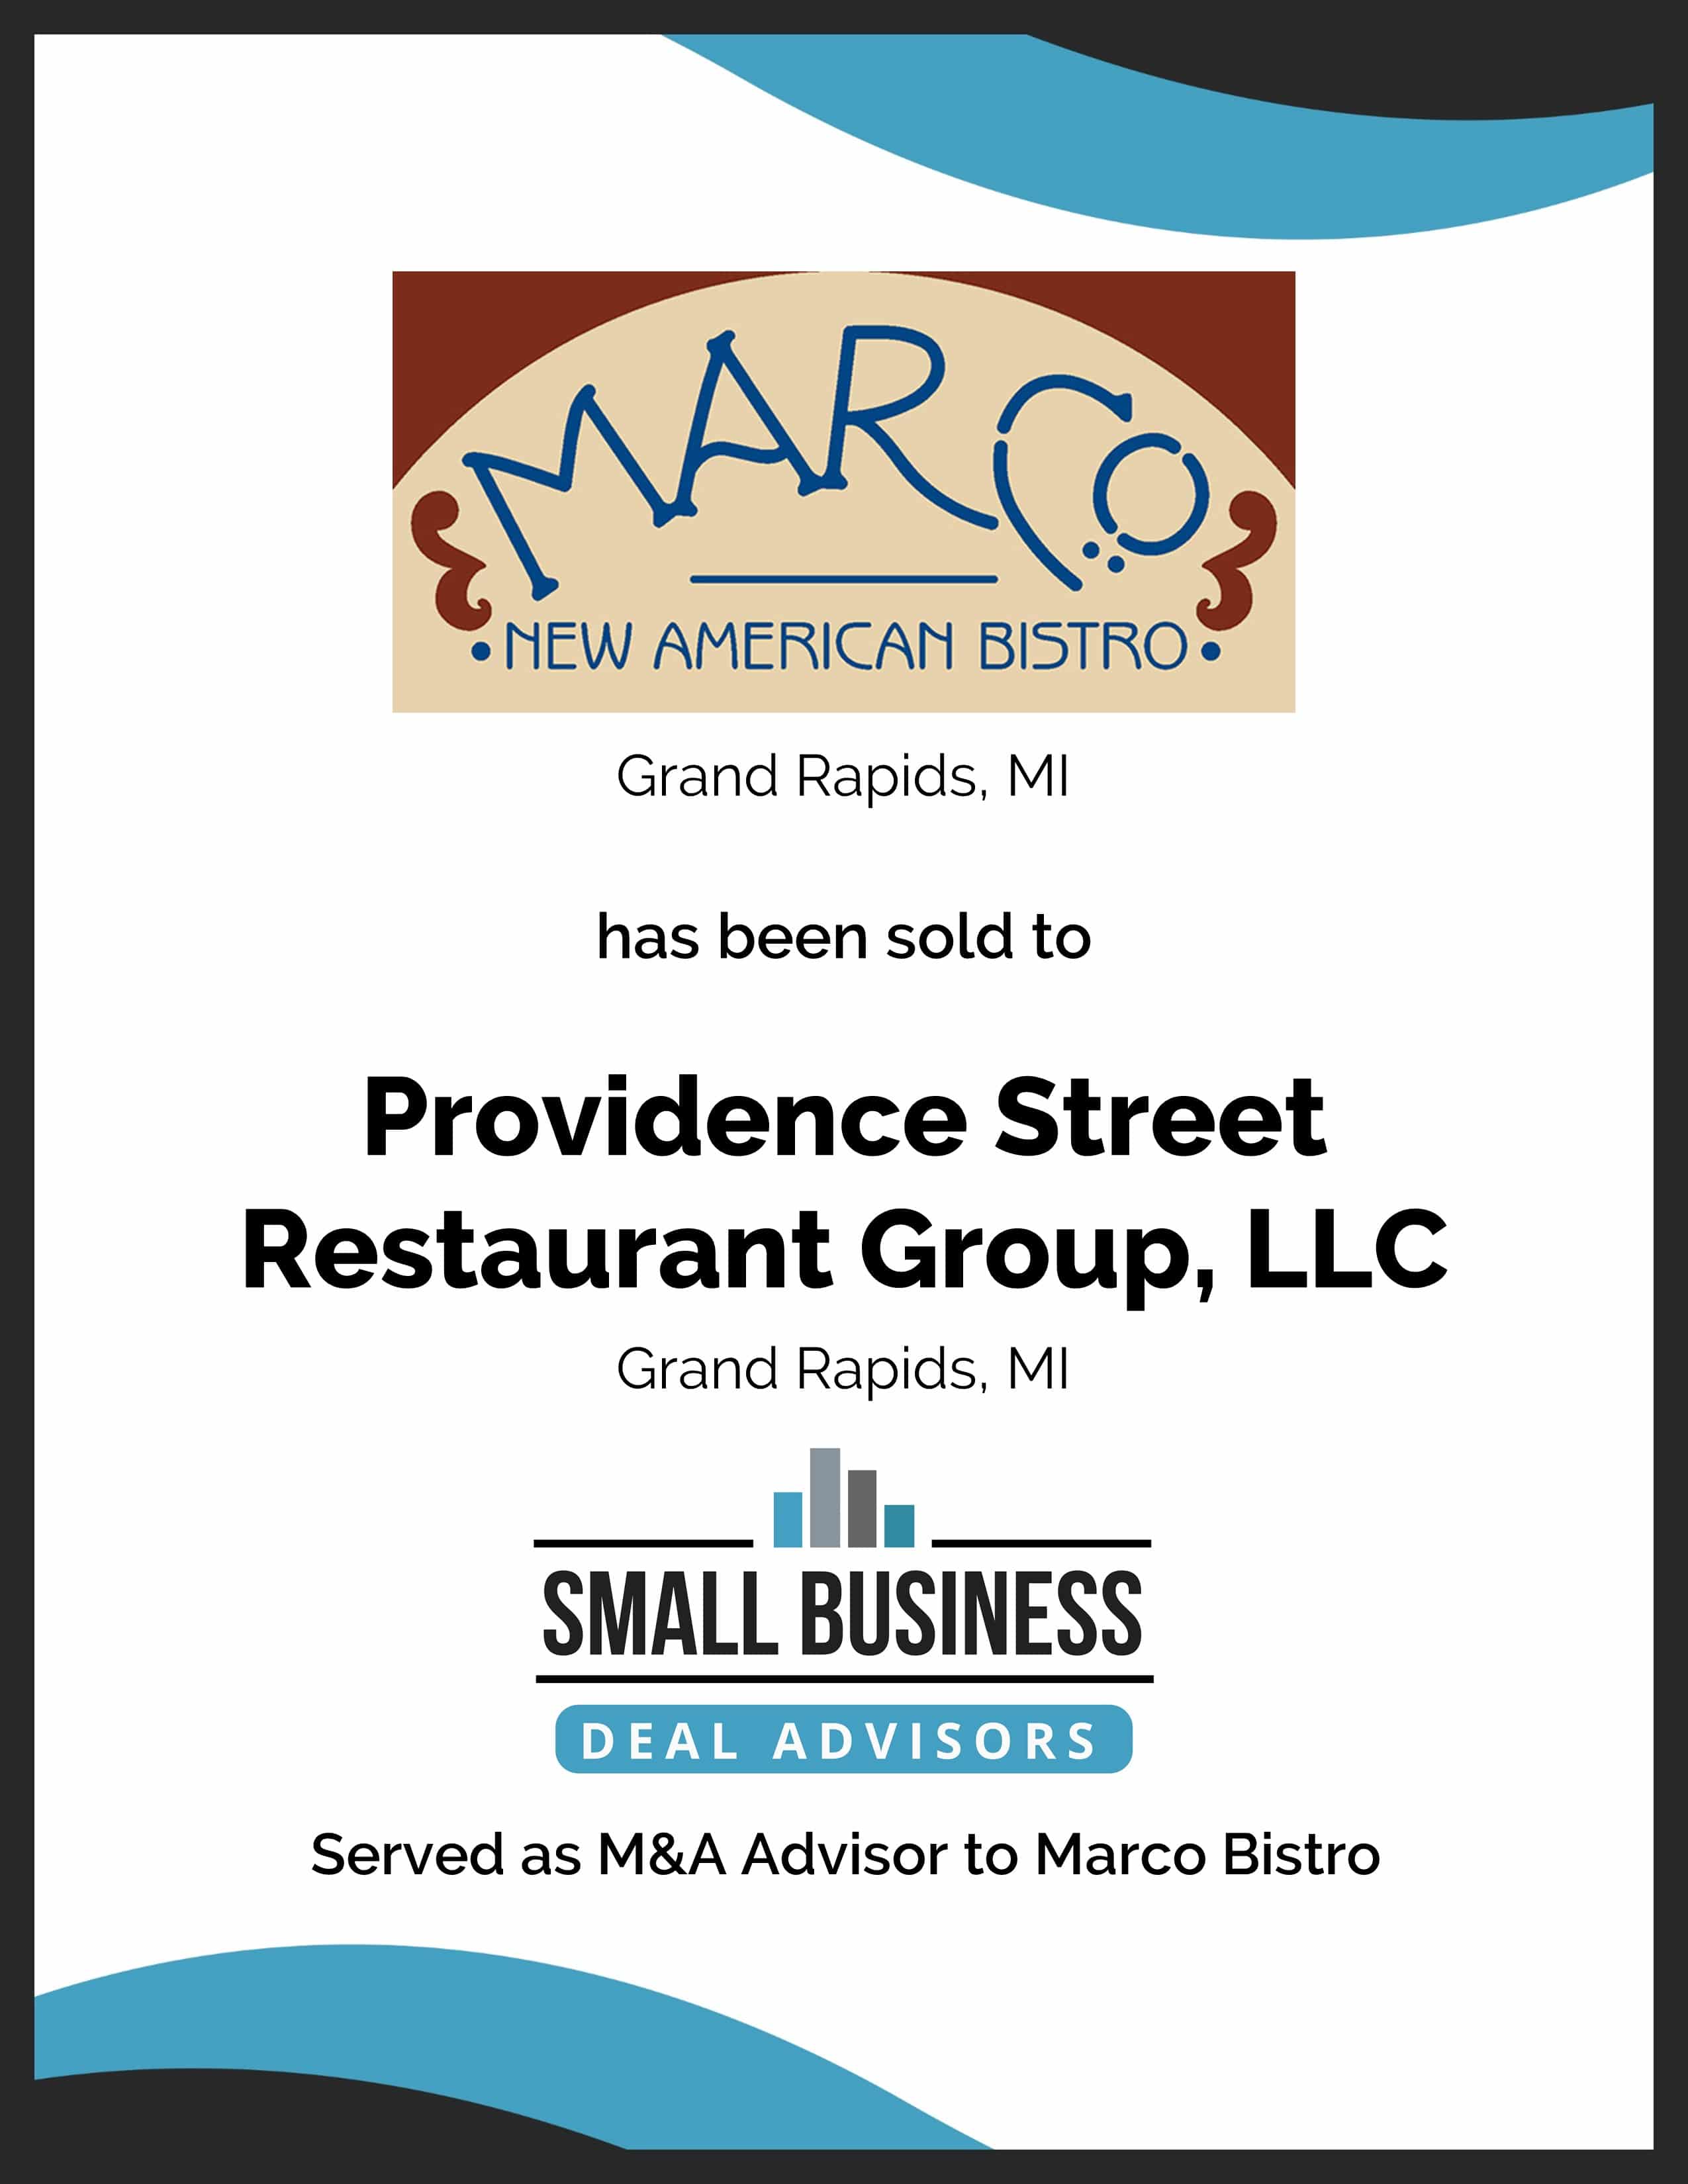 Marco Bistro Acquired by Providence Street Restaurant Group